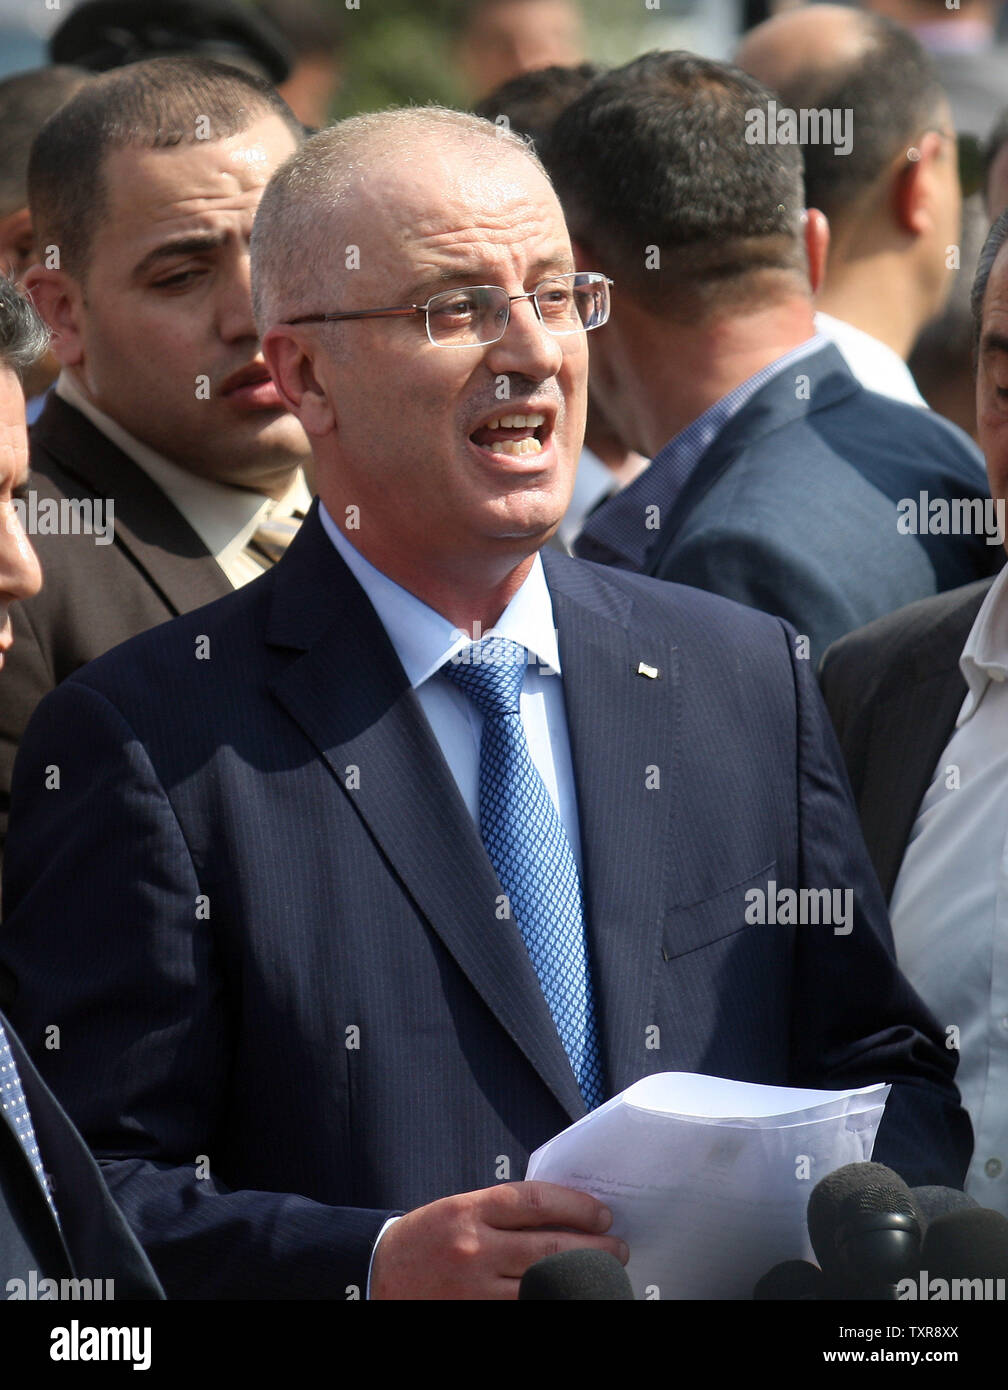 Palestinian prime minister Rami Hamdallah  delivers a speech during a tour to some of the areas worst hit by the 50-day war between Israel and Gaza militants in July and August, during a visit to the Gaza Strip, on October 9, 2014. Hamdallah crossed into Gaza today to hold the first cabinet meeting in the war-ravaged territory of a unity government formed by rivals Fatah and Hamas. UPI/Ismael Mohamad Stock Photo